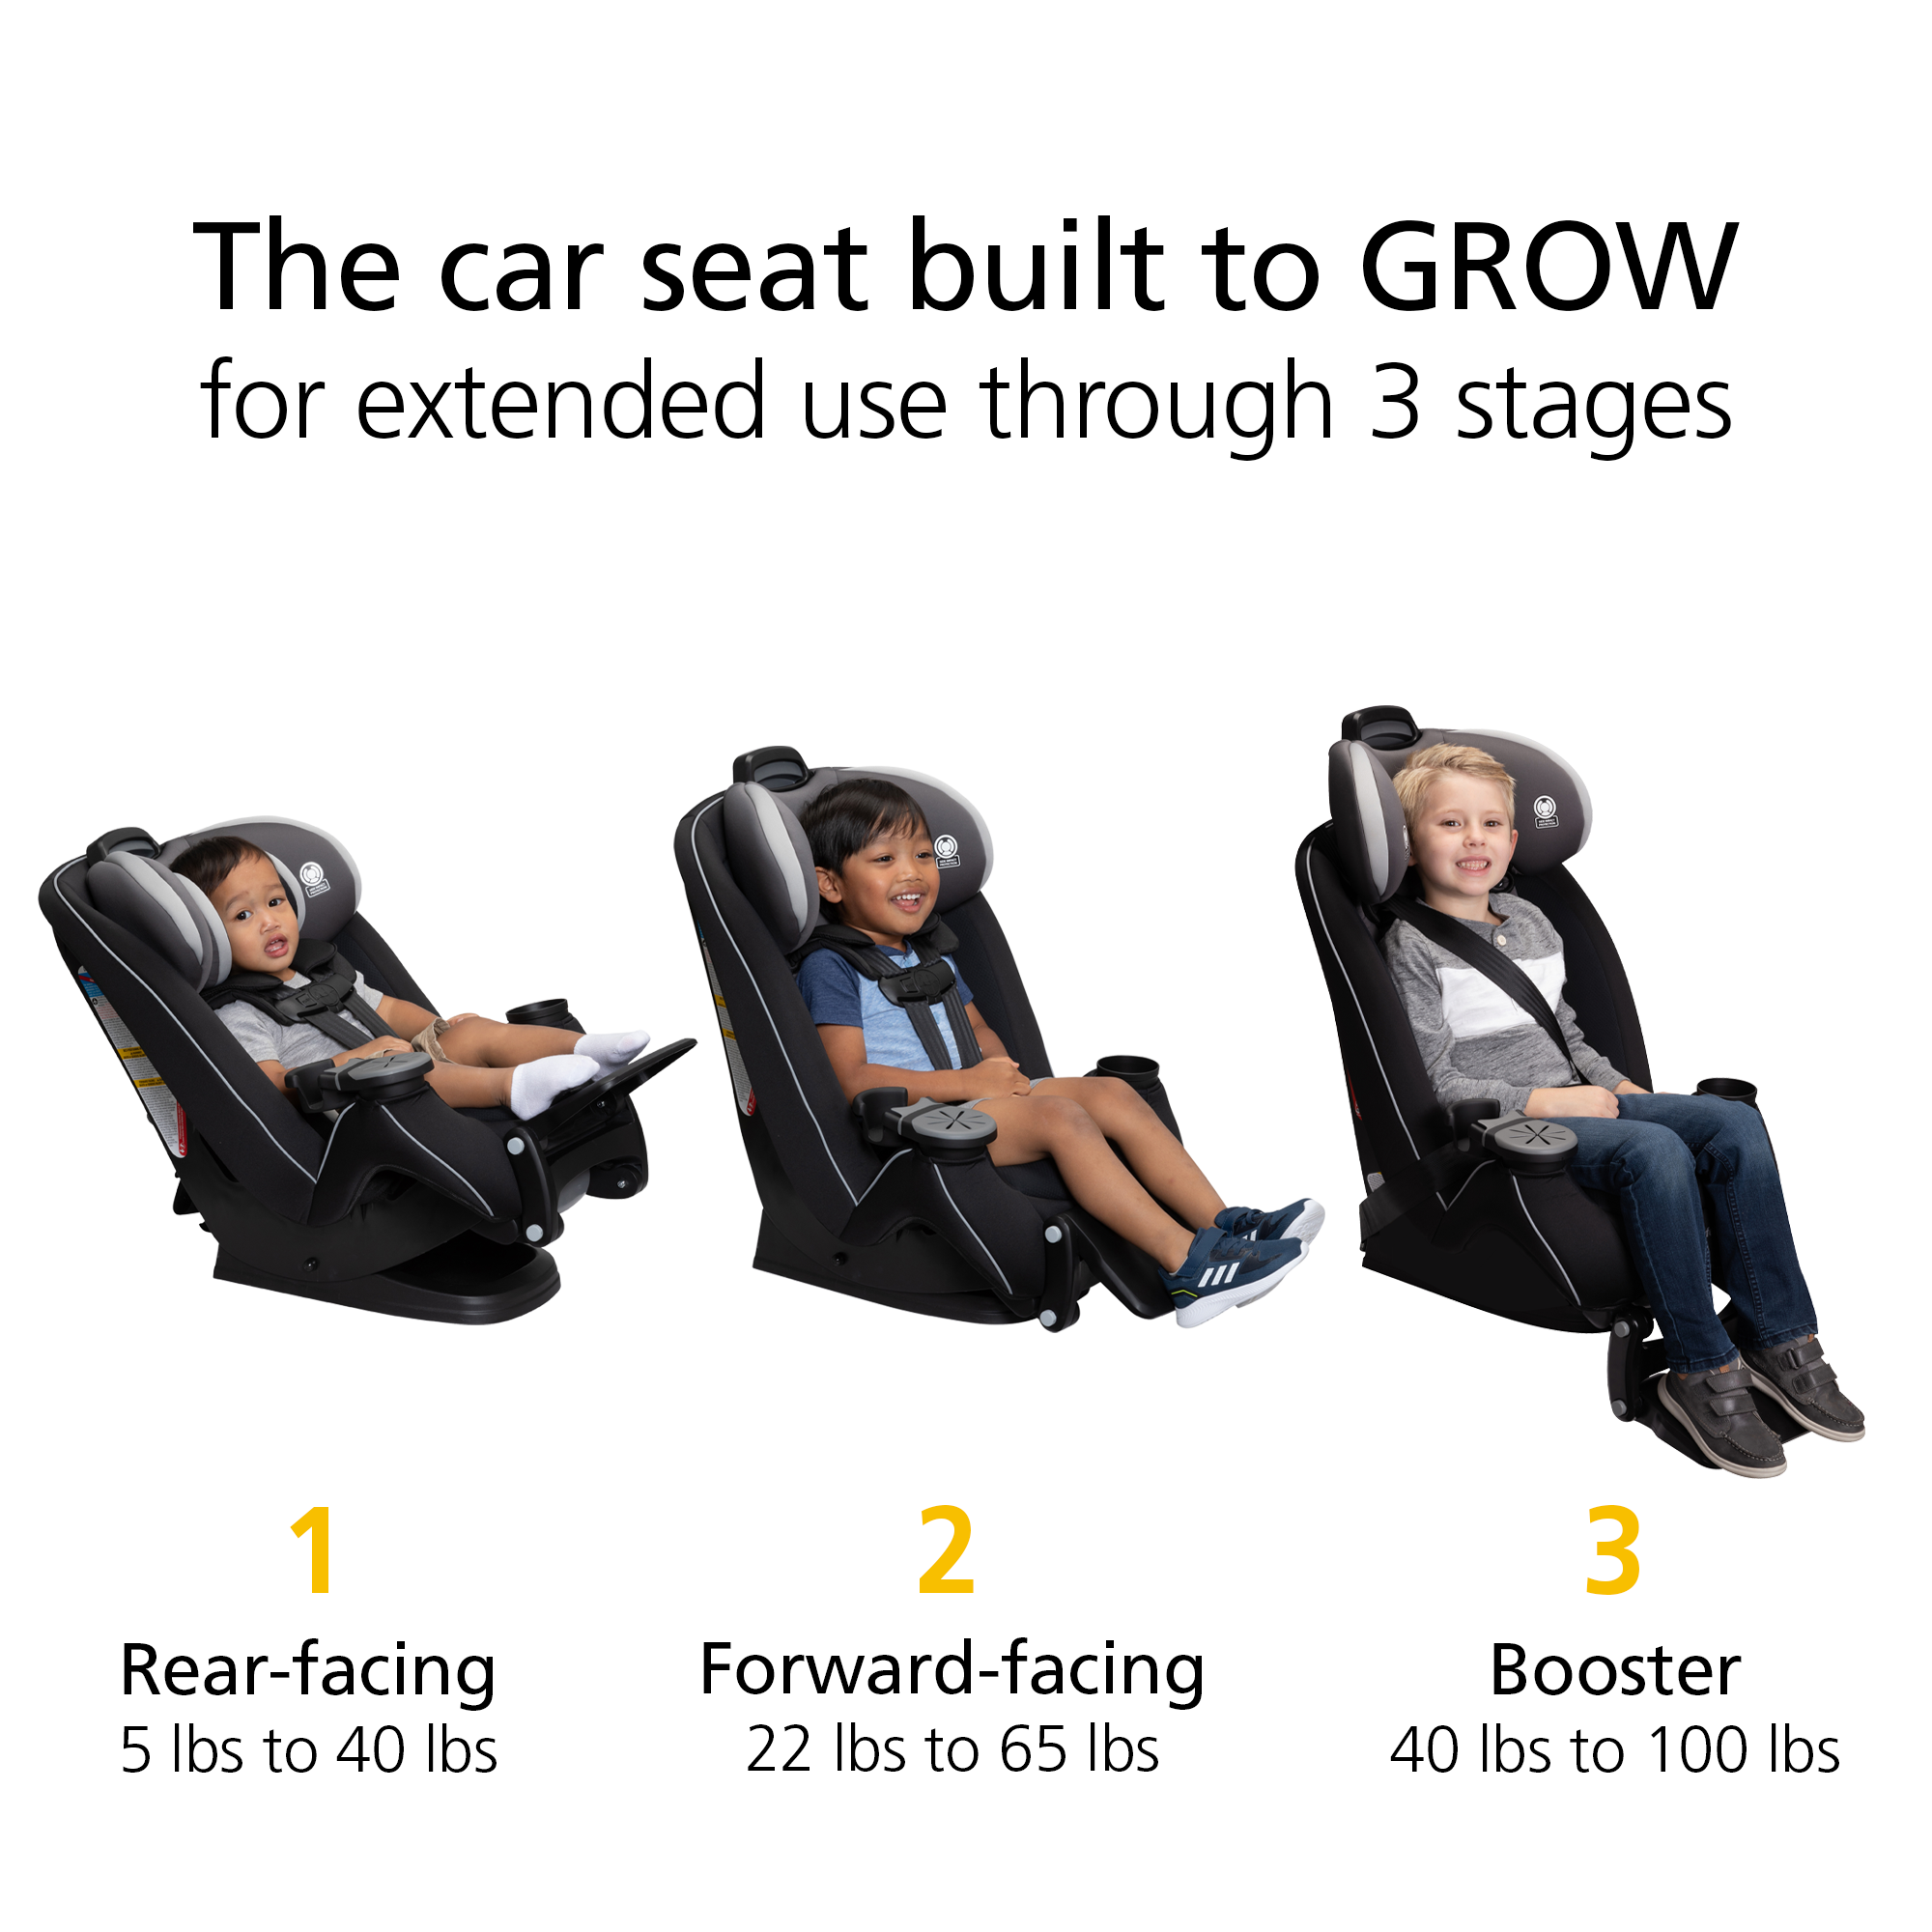 Grow and Go™ Extend 'n Ride LX - the car seat built to GROW - for extended use through 3 stages